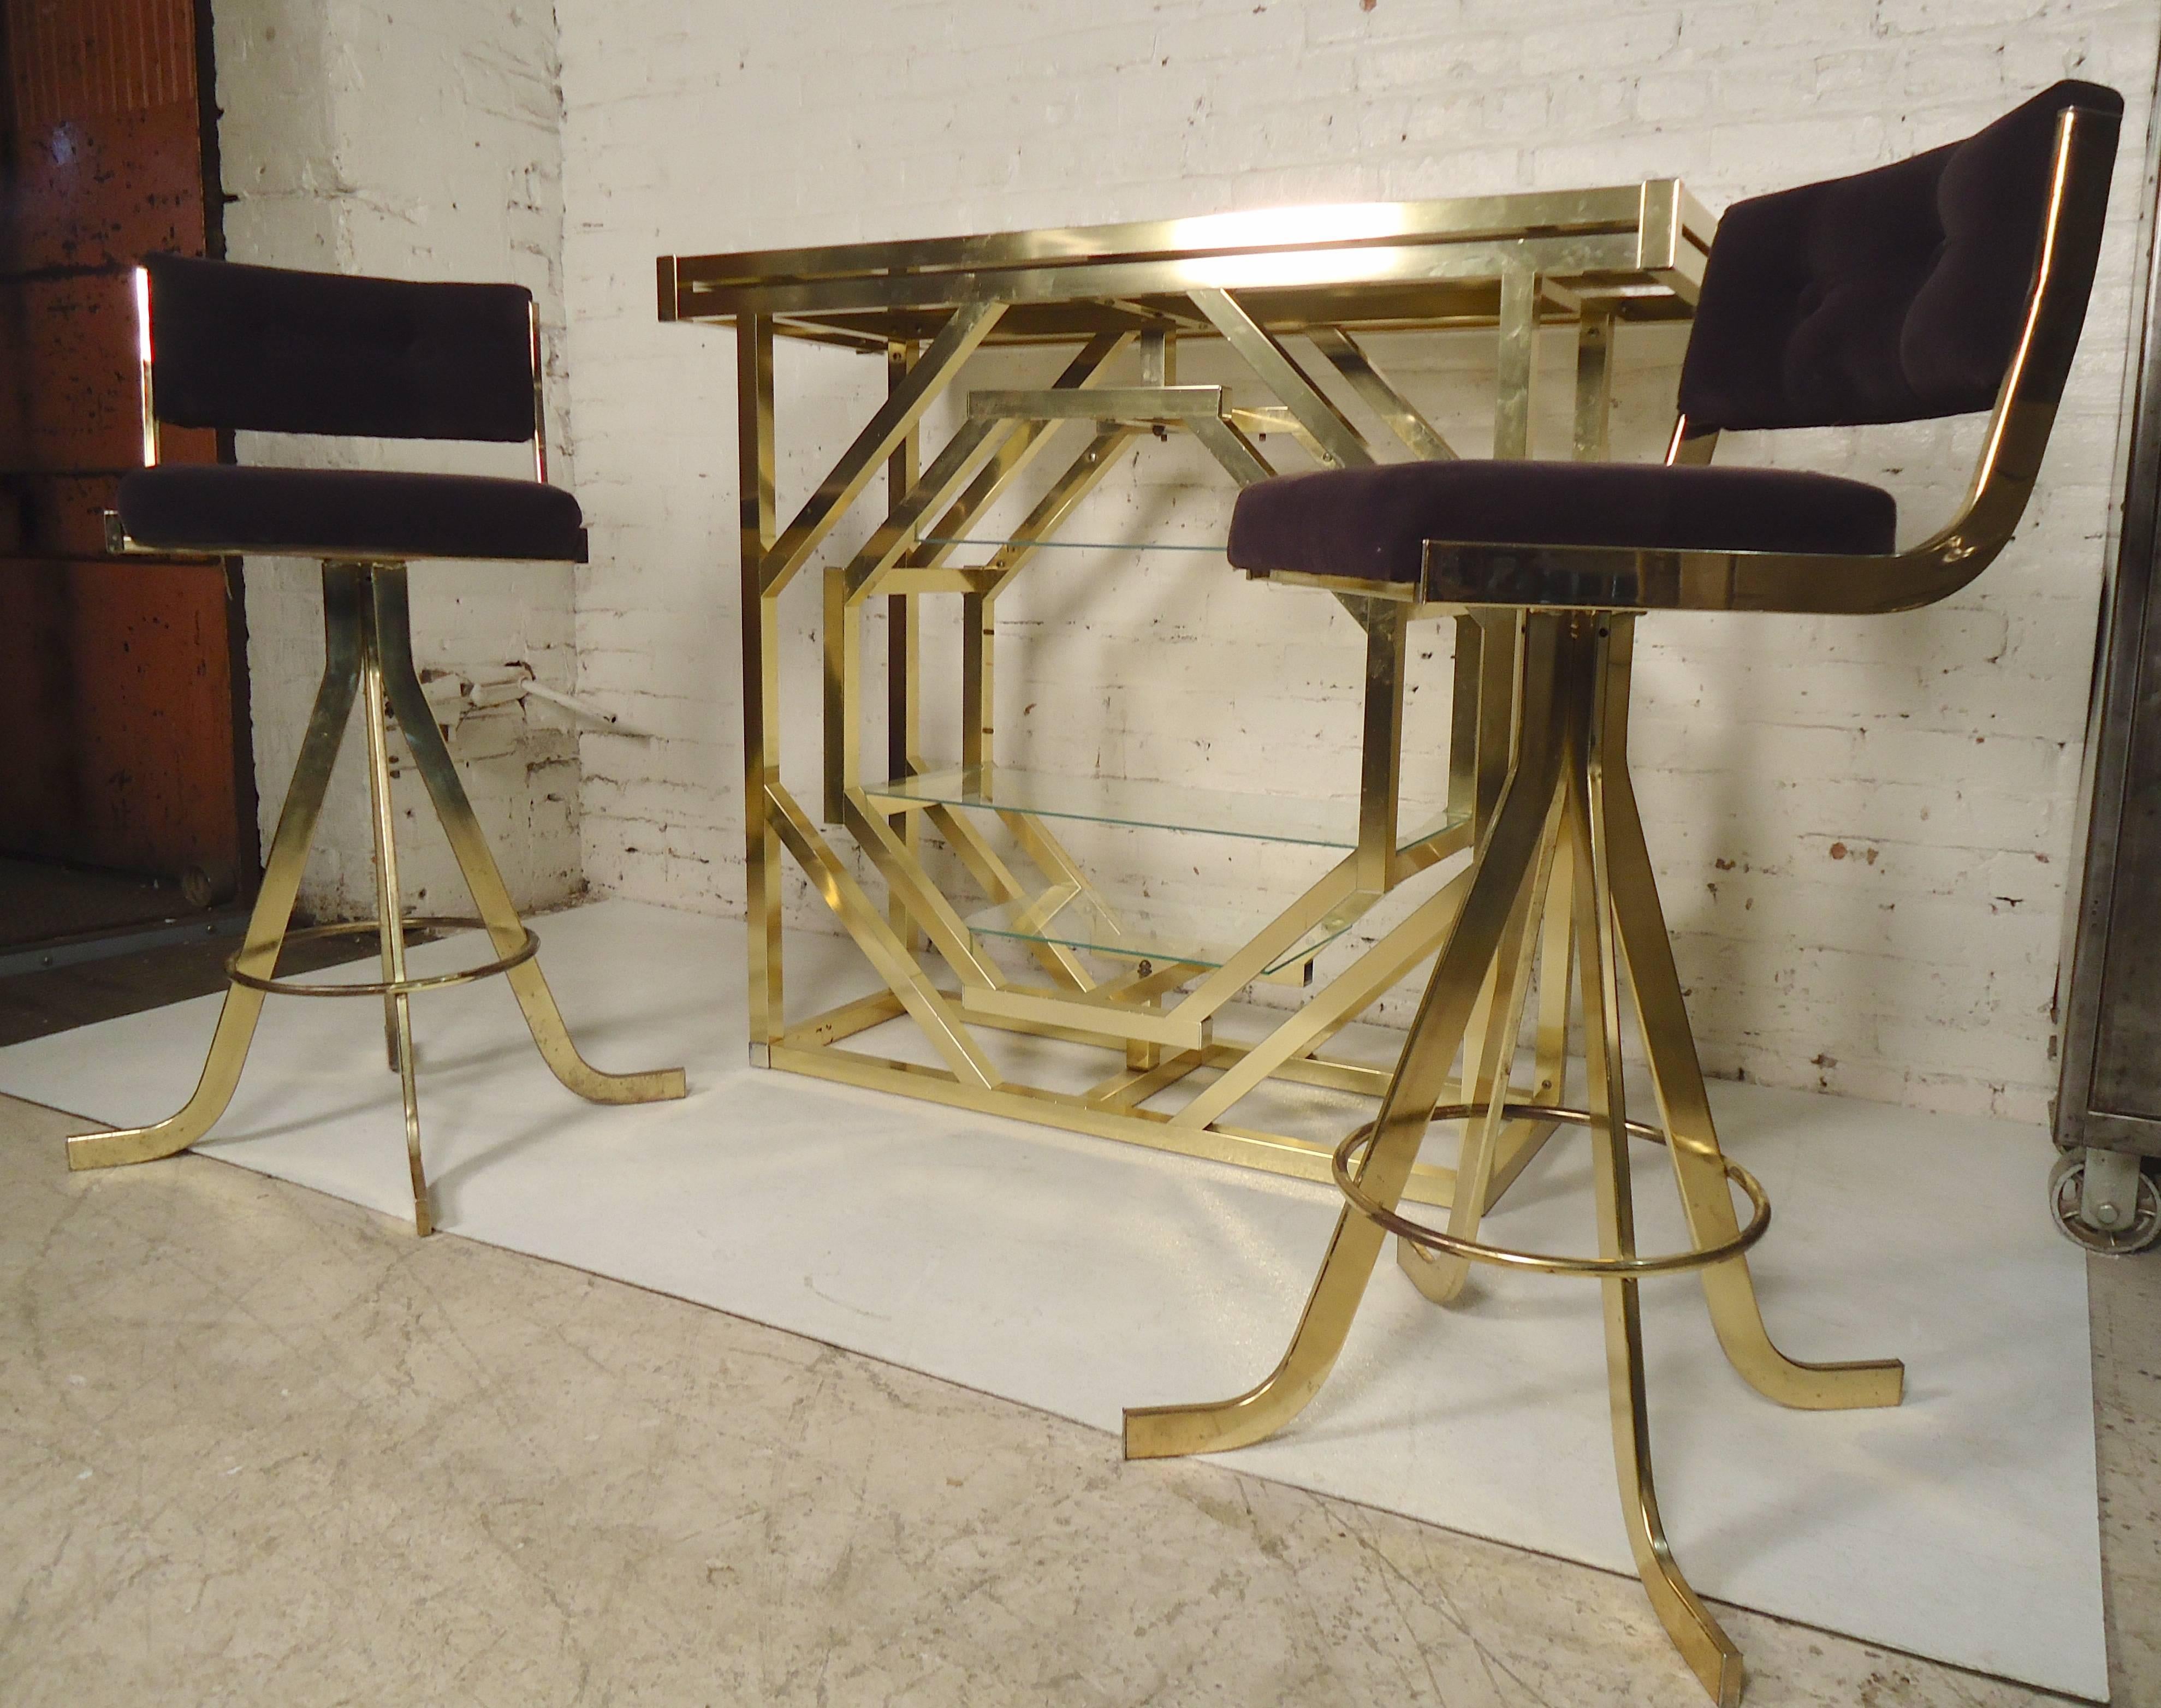 Beautiful brass dry bar with two stools. Bar has a black glass top and unusual rotating shelving unit. Stools have soft purple fabric.
Bar: 49.5